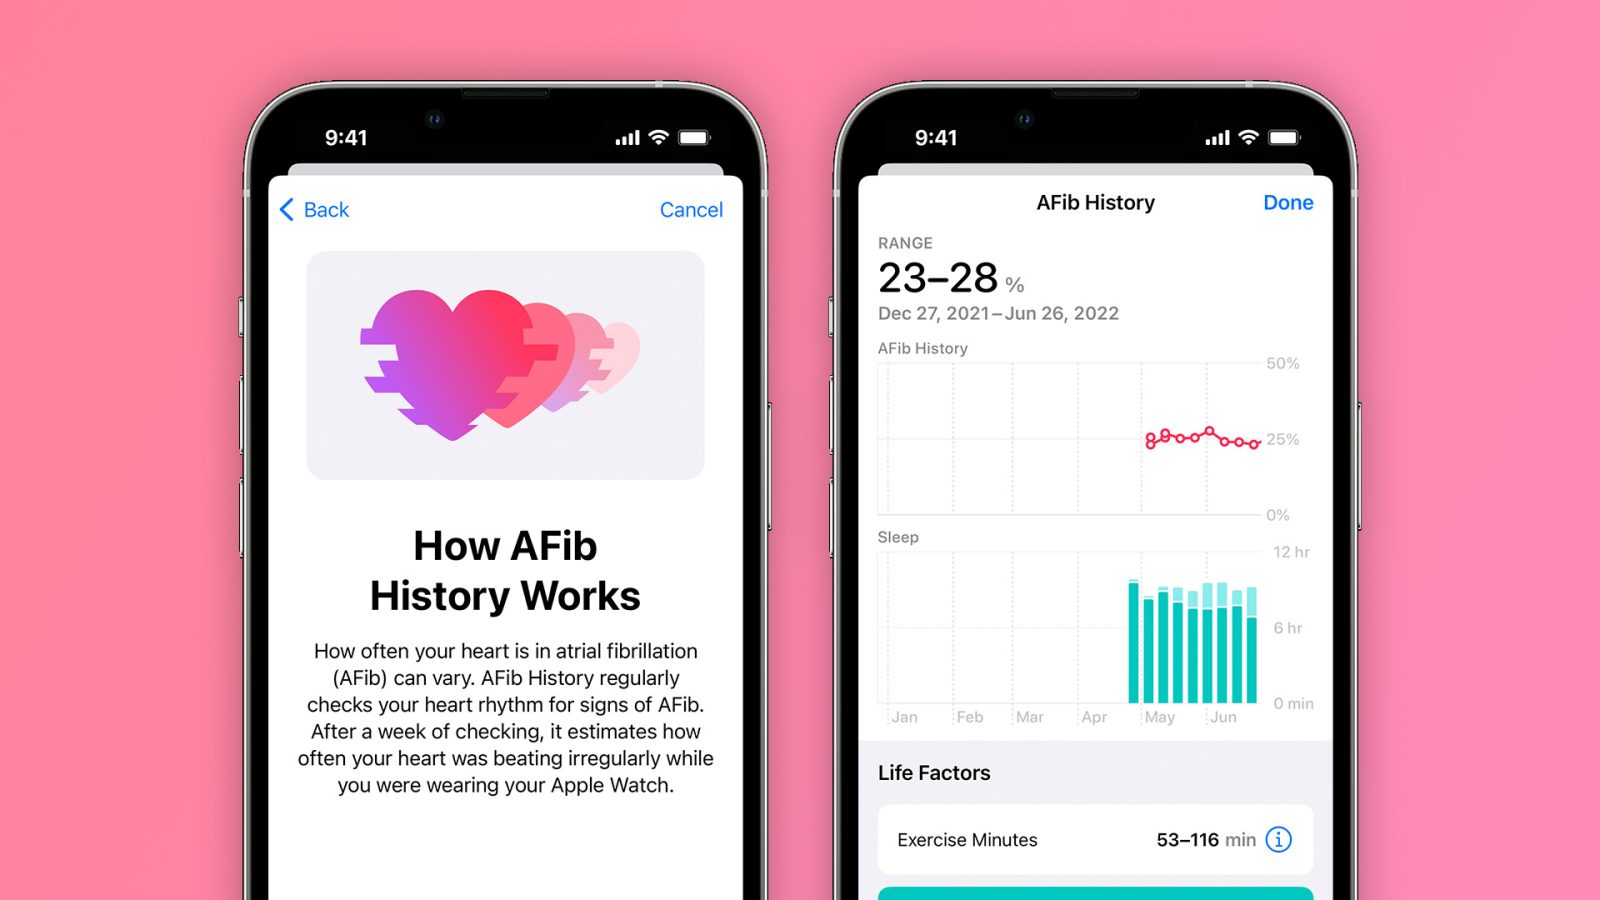 watchOS 9.2 update expands the AFib History feature on Apple Watch to another country